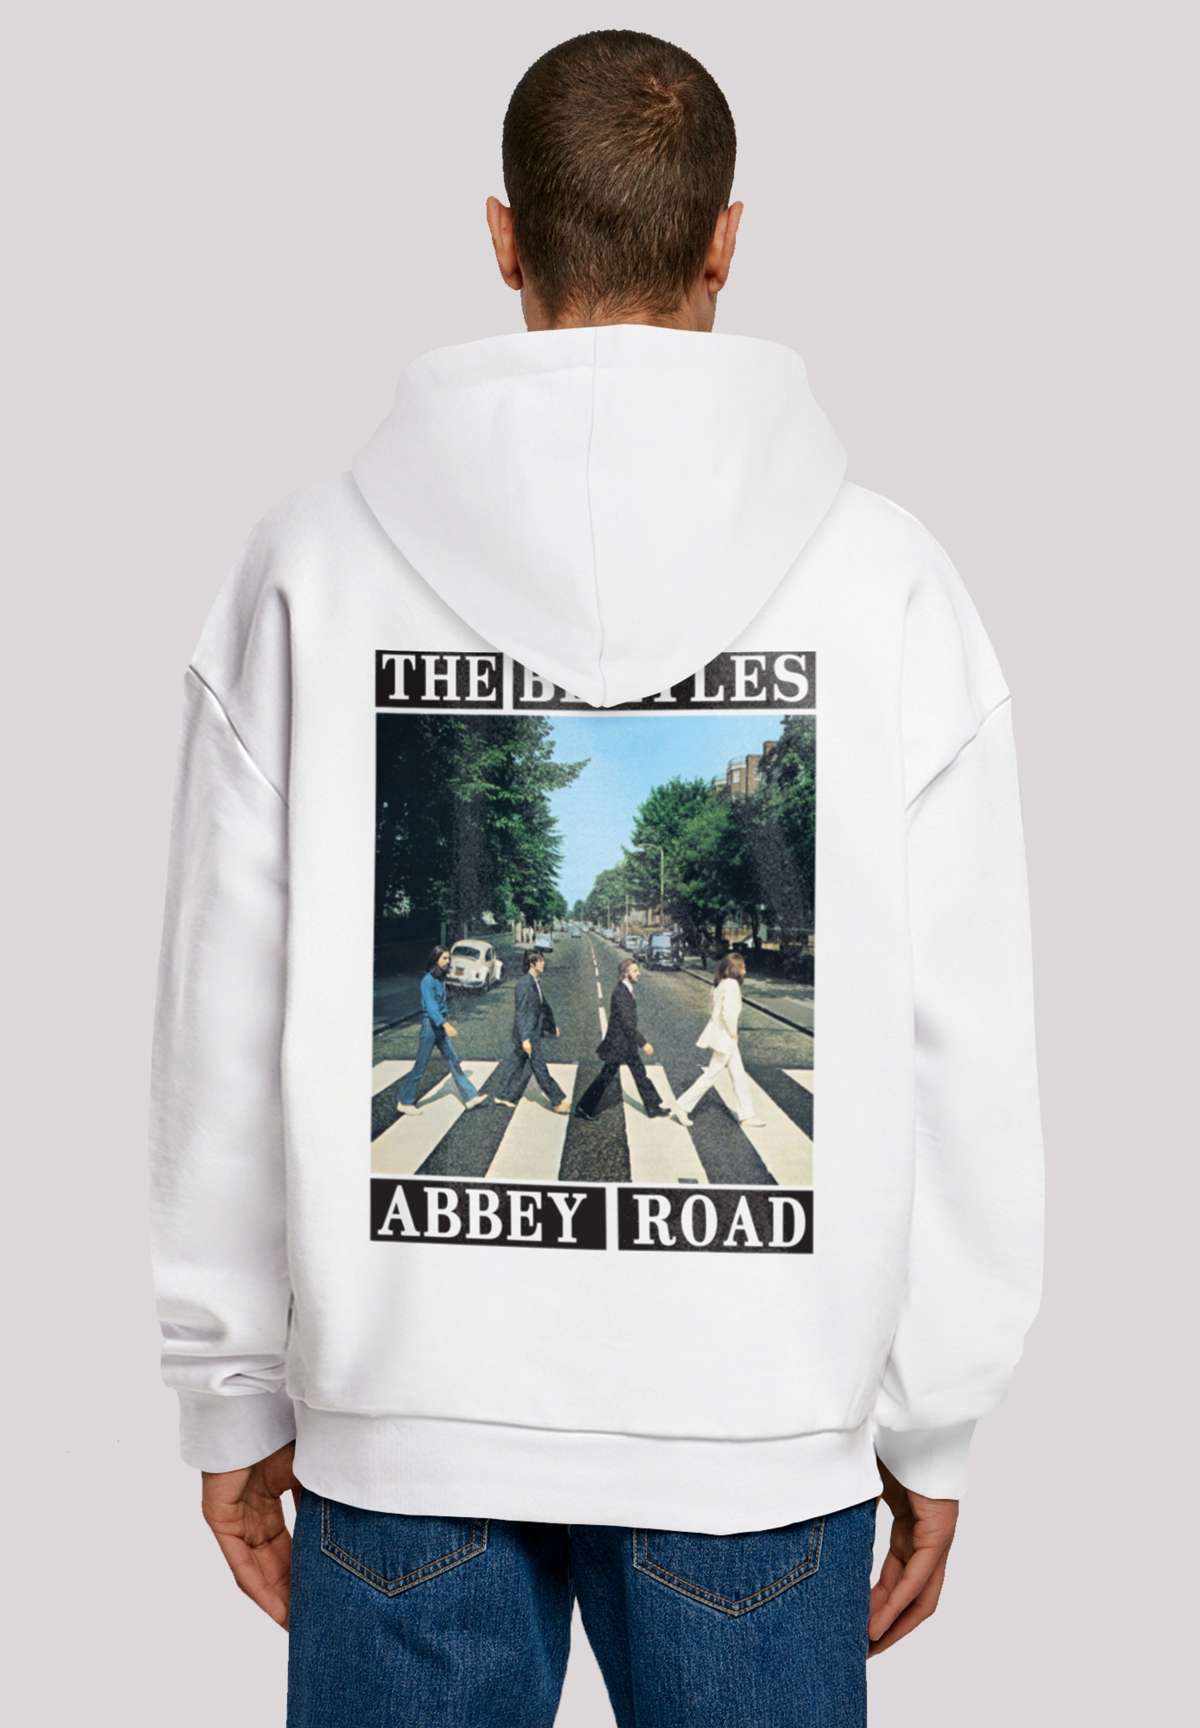 Кофта THE BEATLES BAND ABBEY ROAD